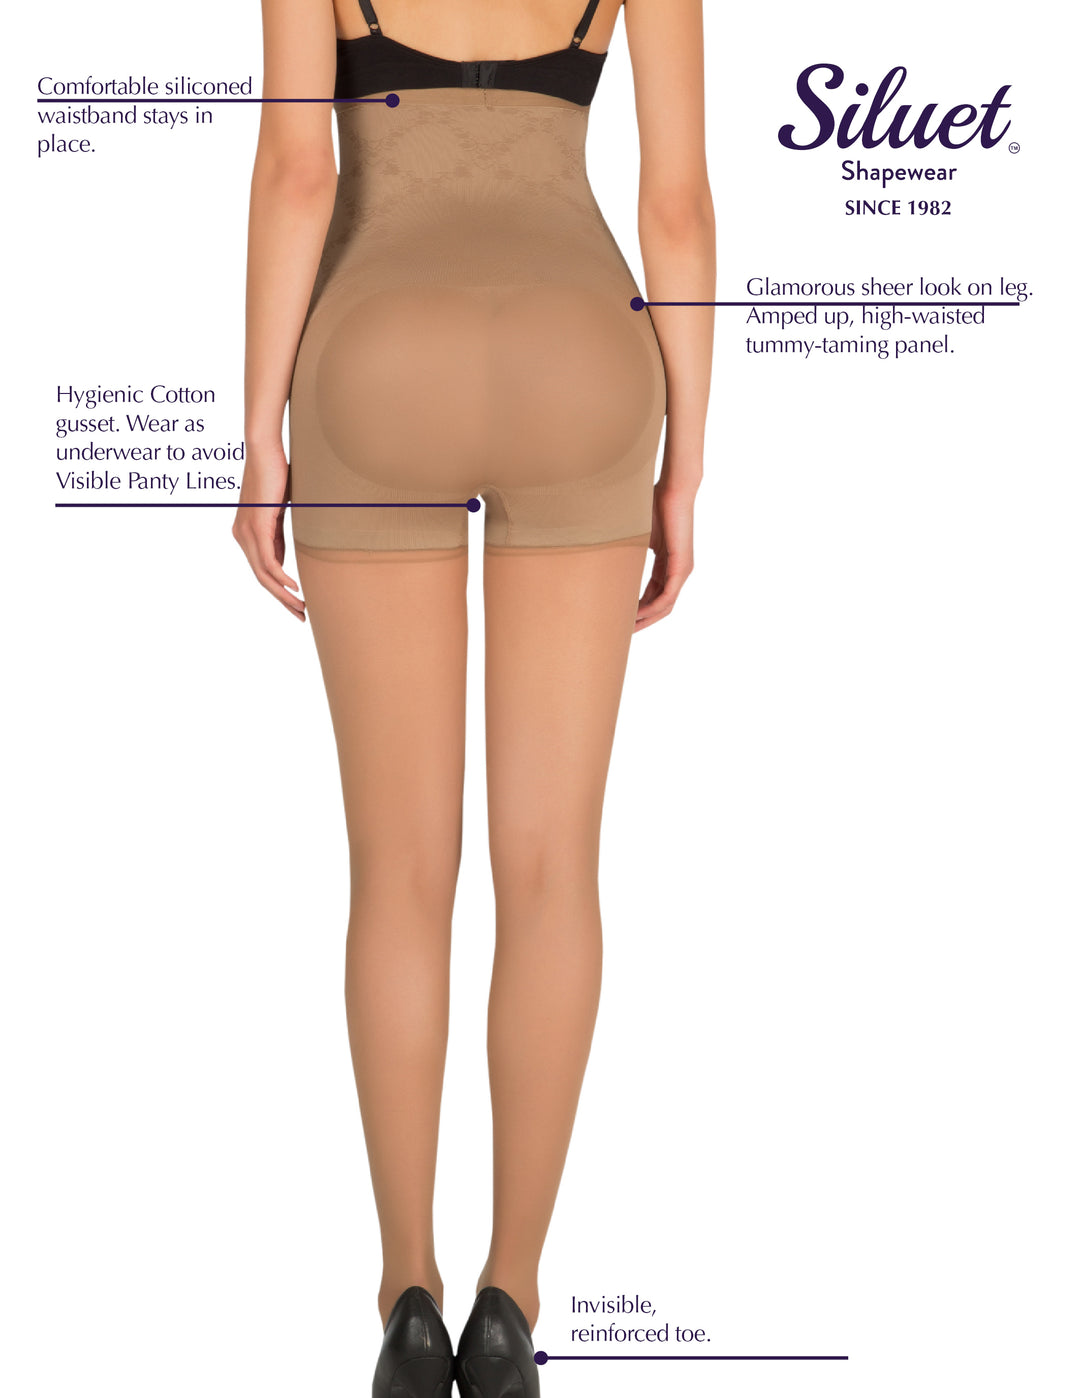 1T1824 Seamless High- Waisted Shaper Tights